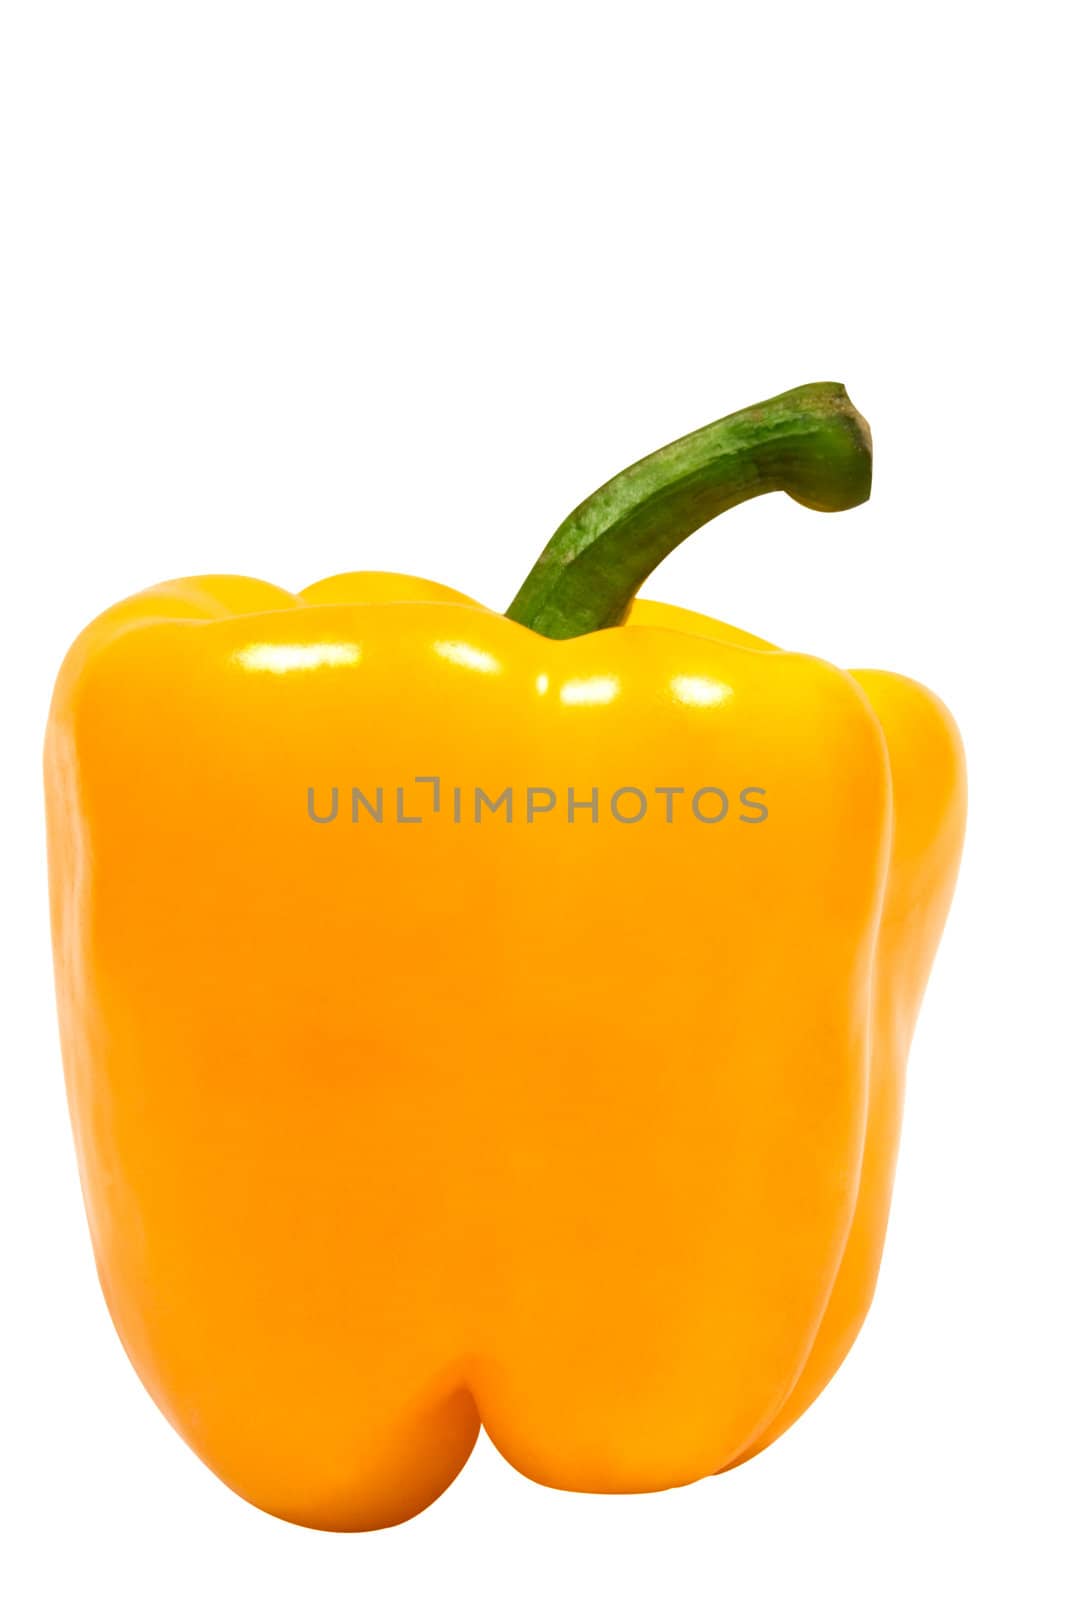 Yellow Pepper with Clipping Path by winterling